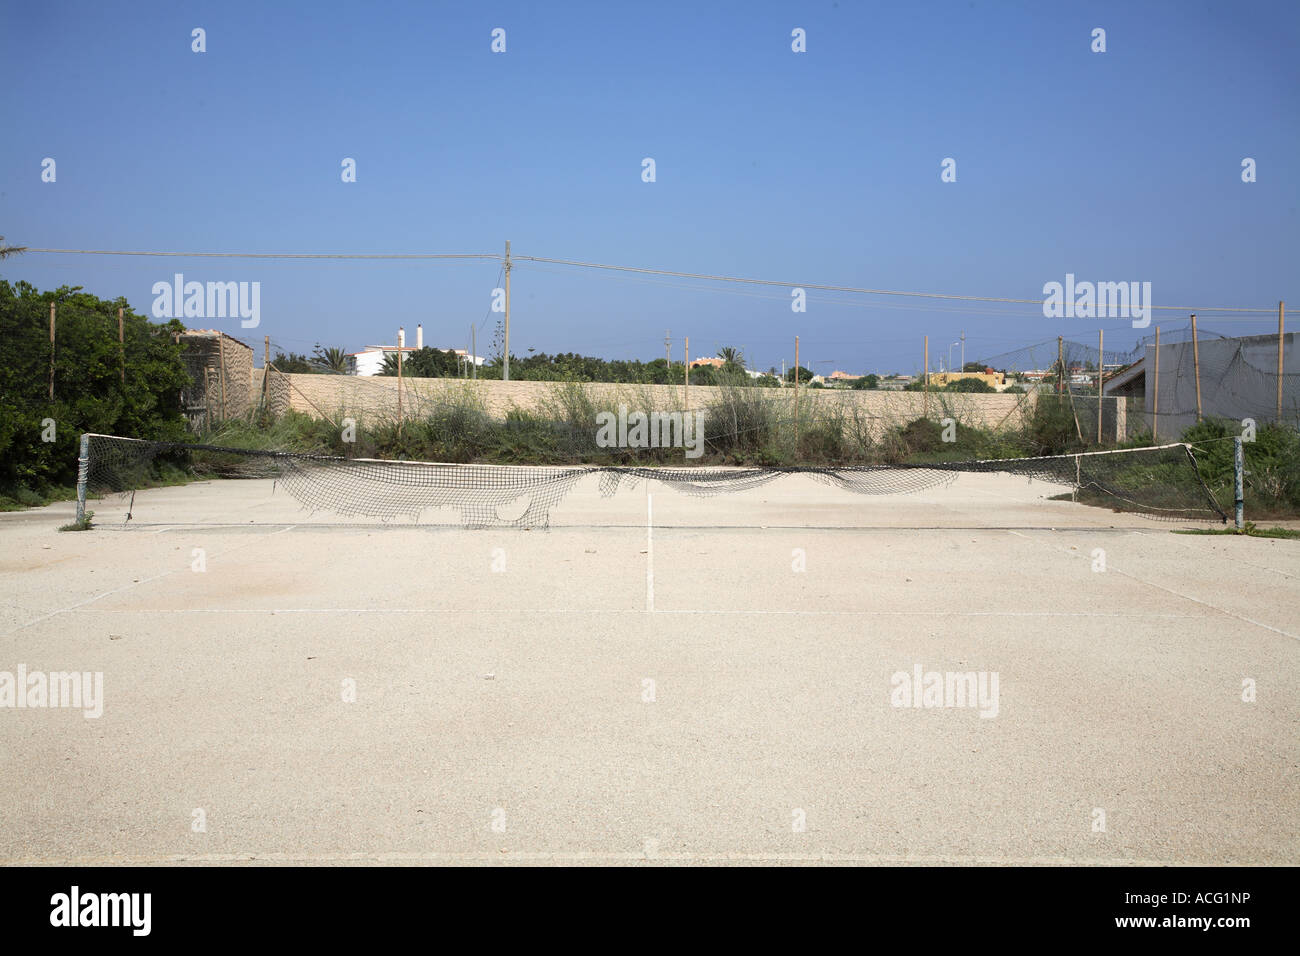 Empty and ruined tennis court Stock Photo